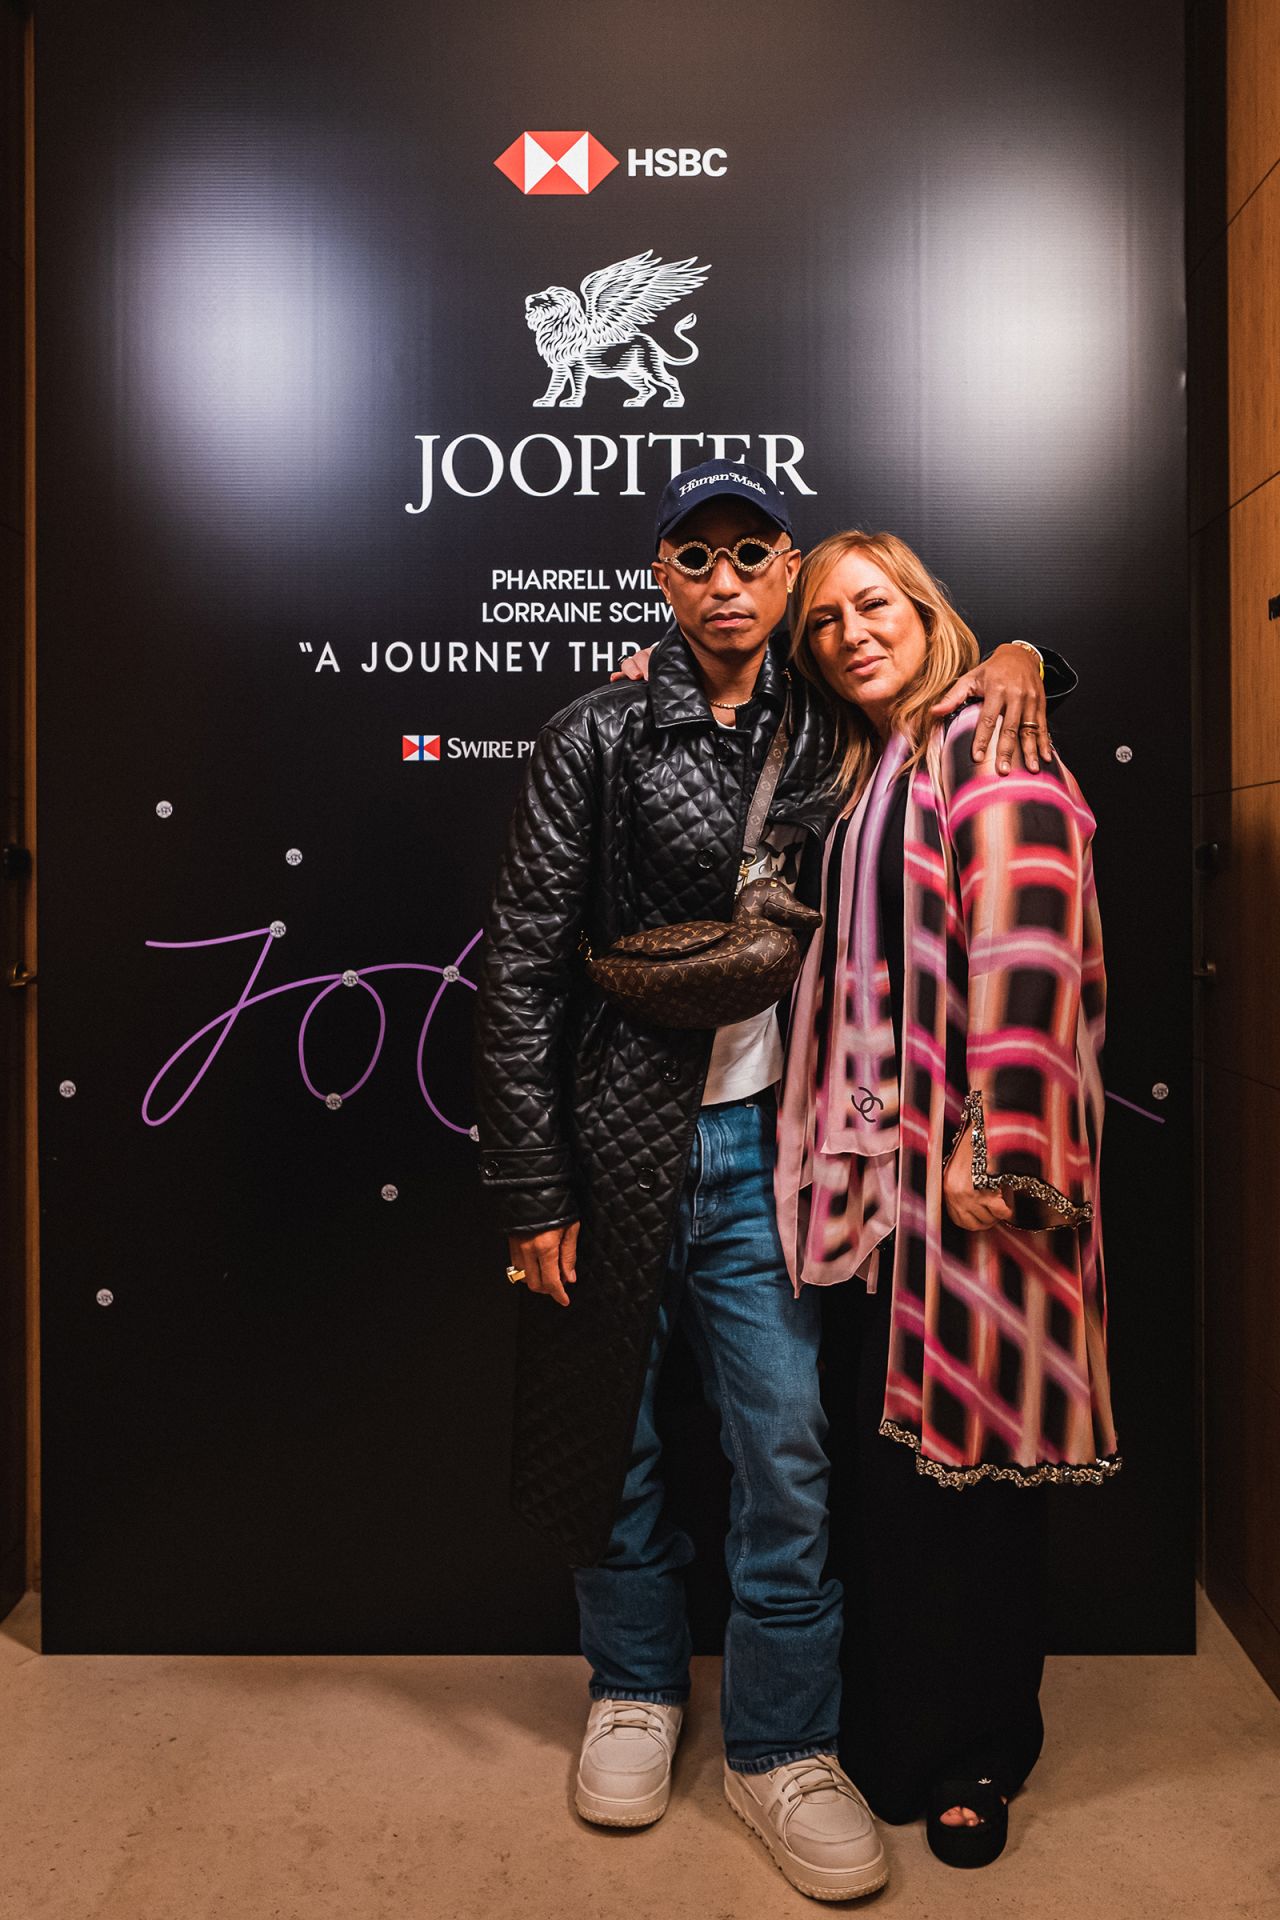 Pharrell Williams and Lorraine Schwartz at a Joopiter event held at The Upper House in Hong Kong.